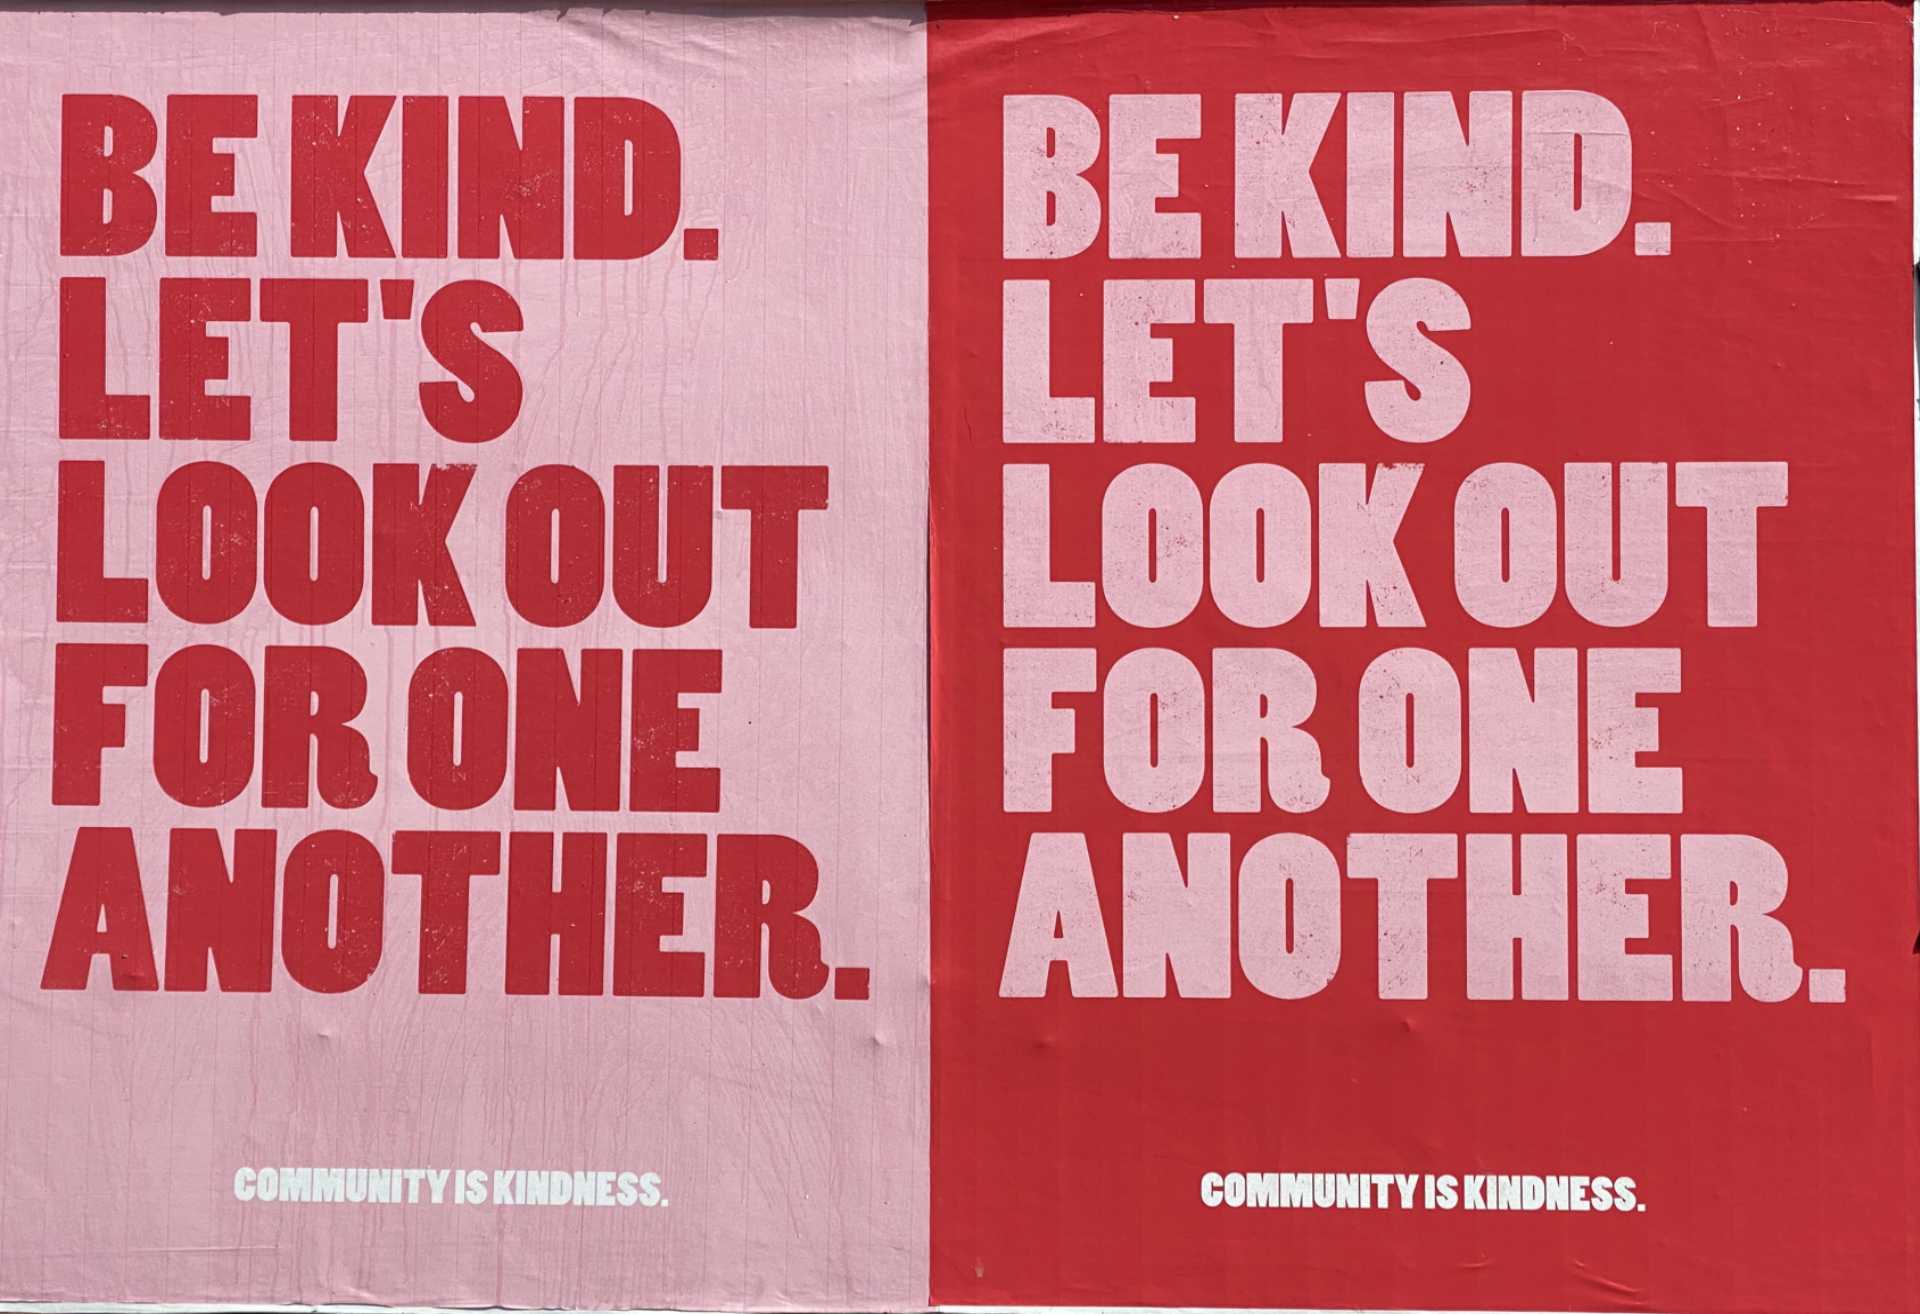 Be kind (1)